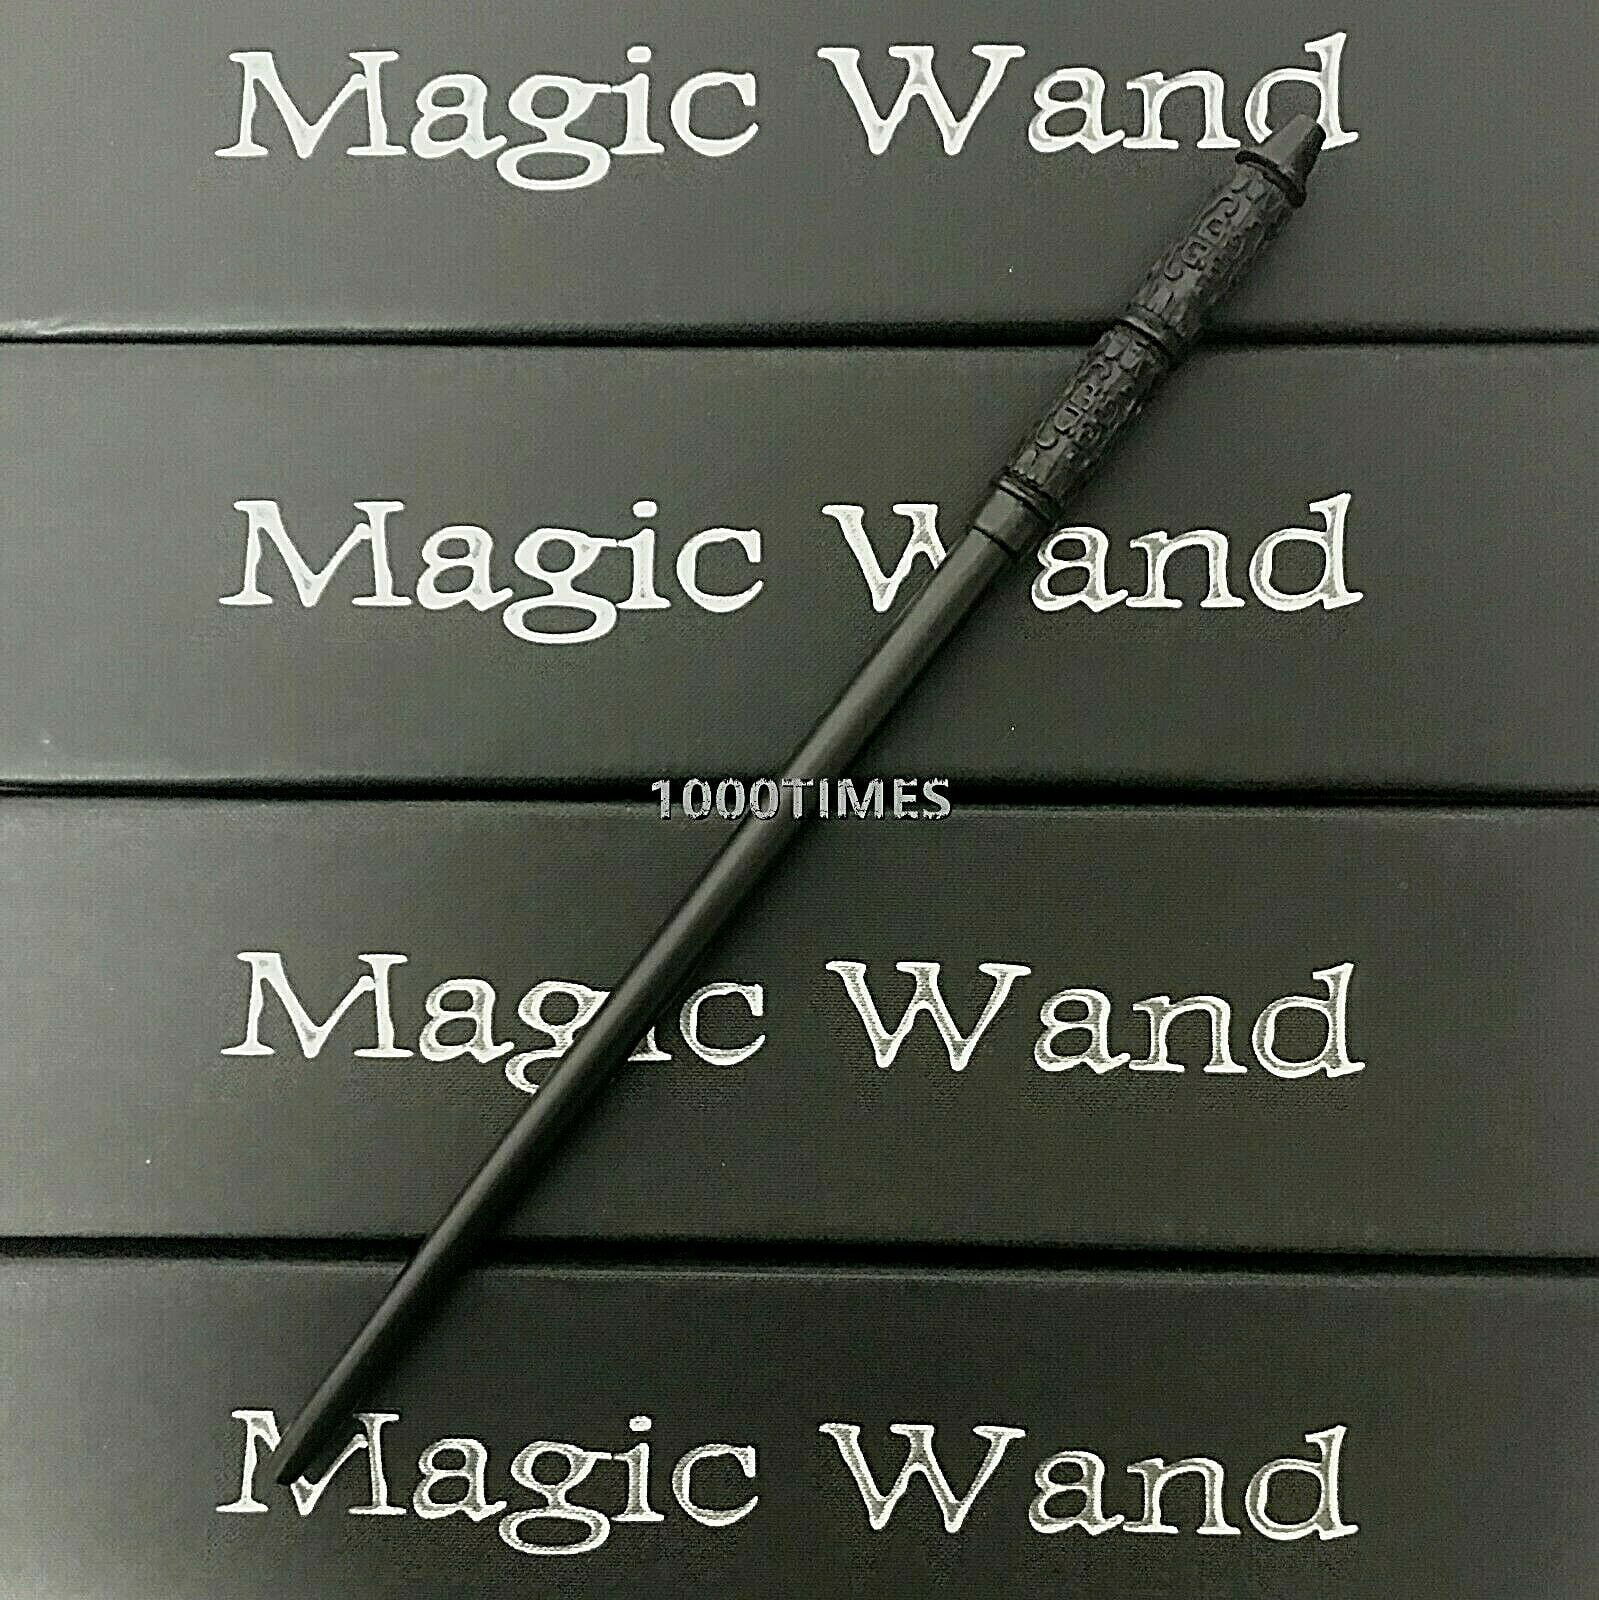 Harry Potter Severus Snape Wand Replica Cosplay Gryffindor 18 Slytherin Magic